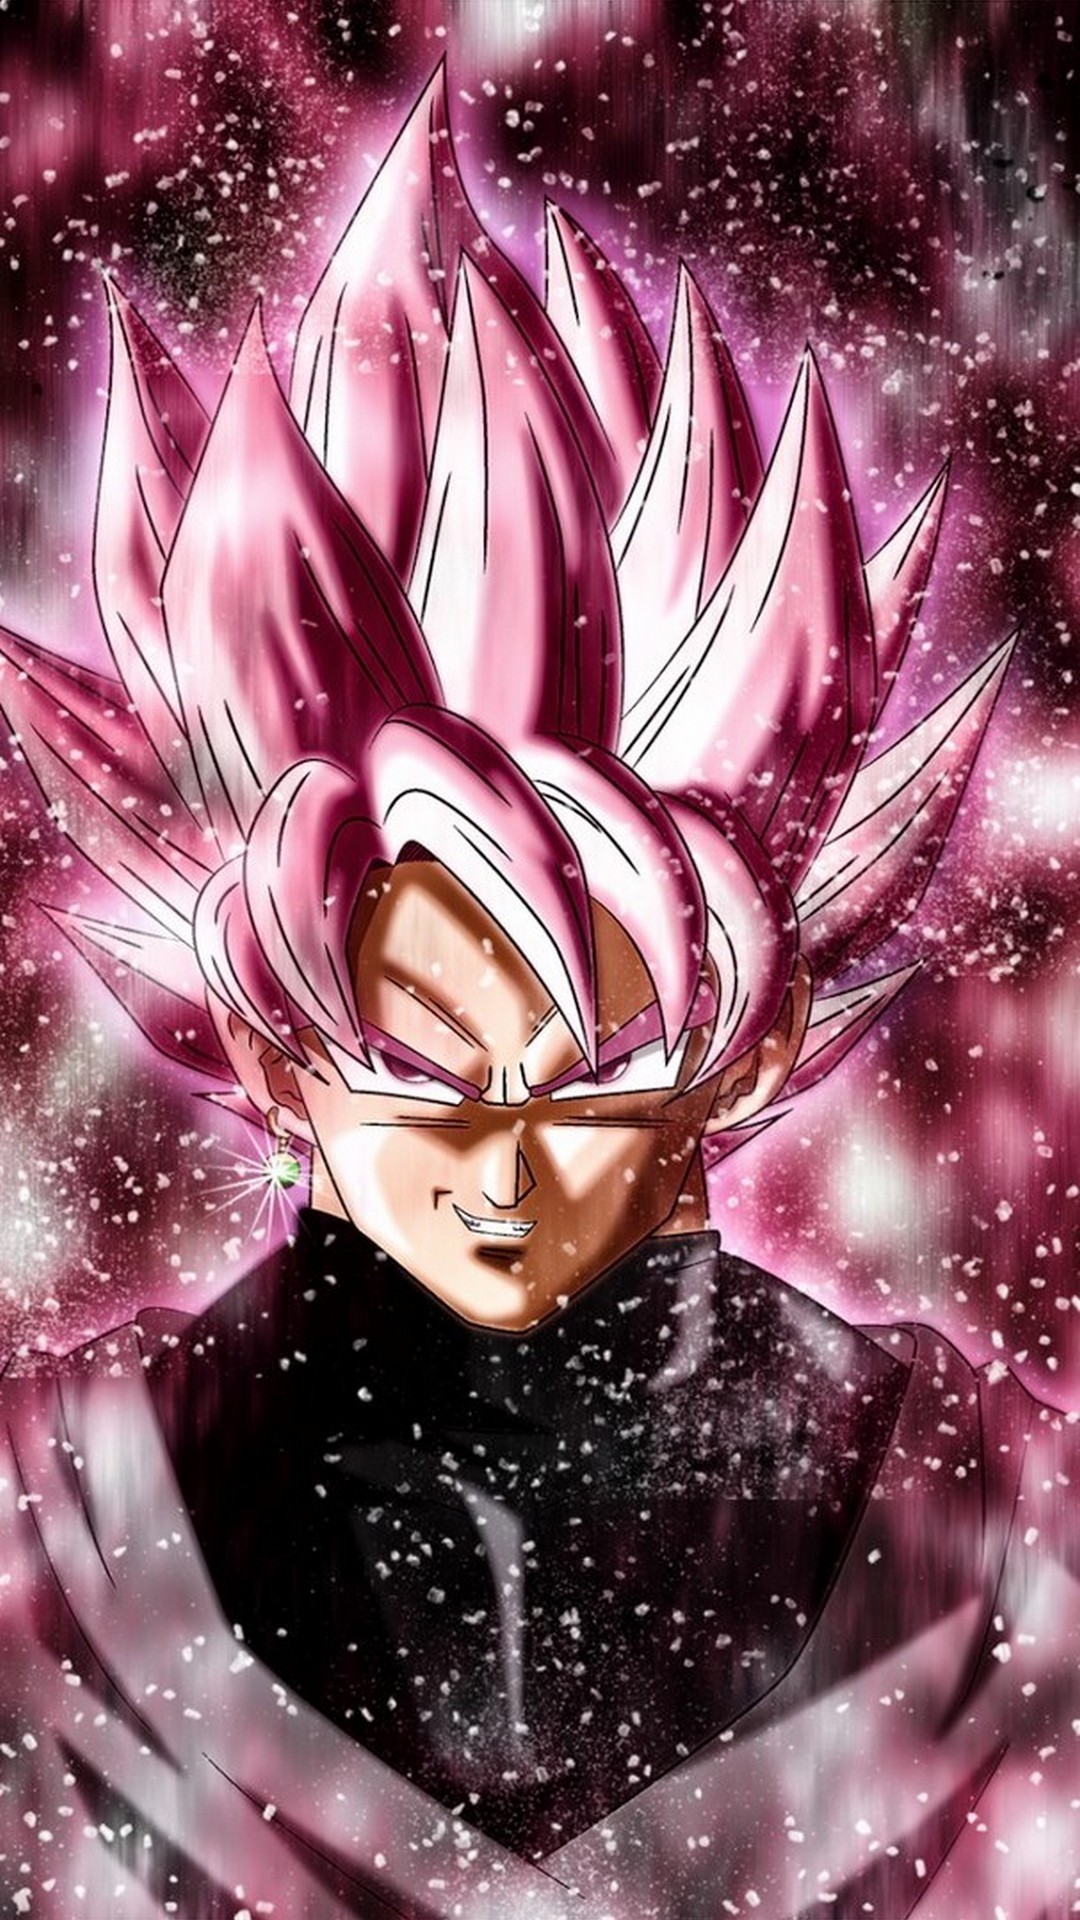 Wallpaper Black Goku Android with HD resolution 1080x1920